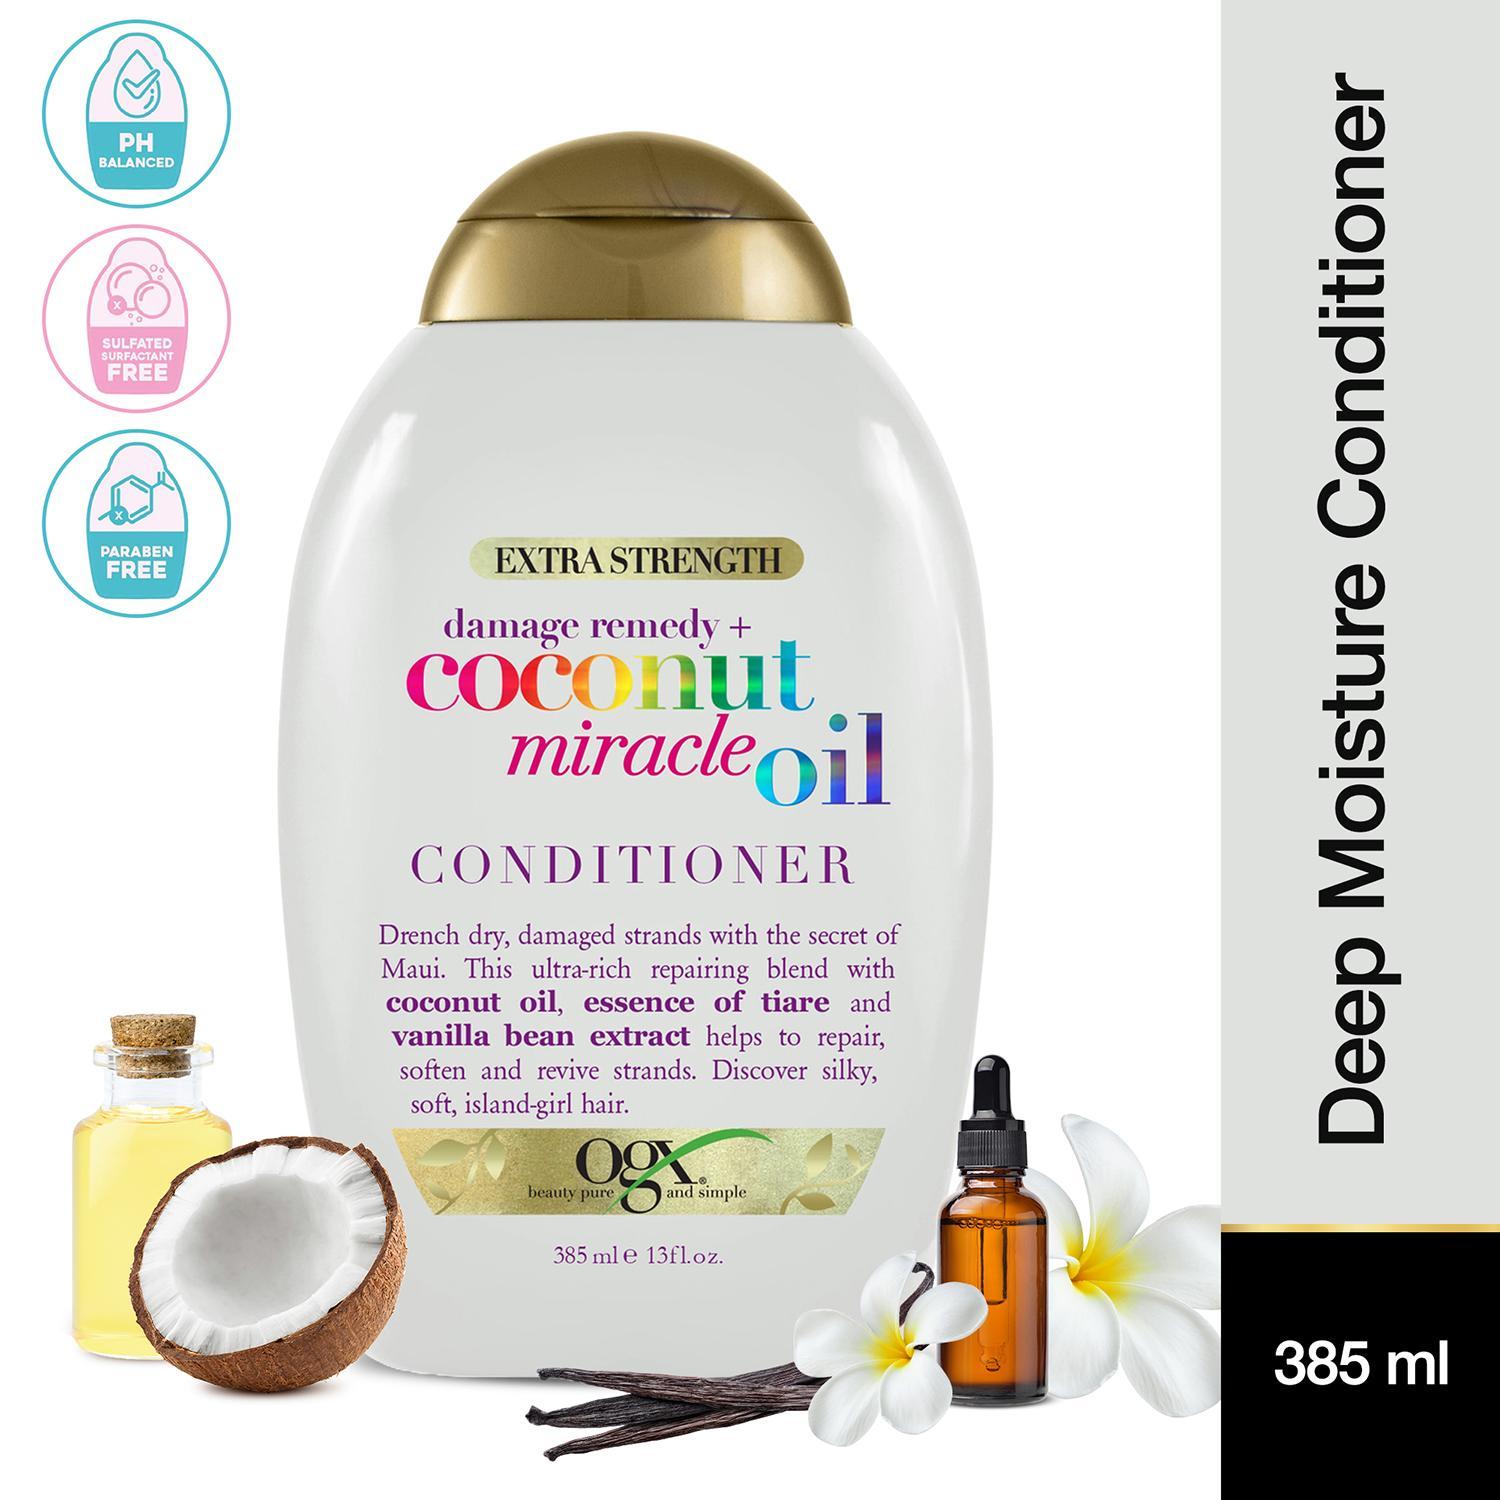 ogx extra strength damage remedy coconut miracle oil conditioner (385 ml)